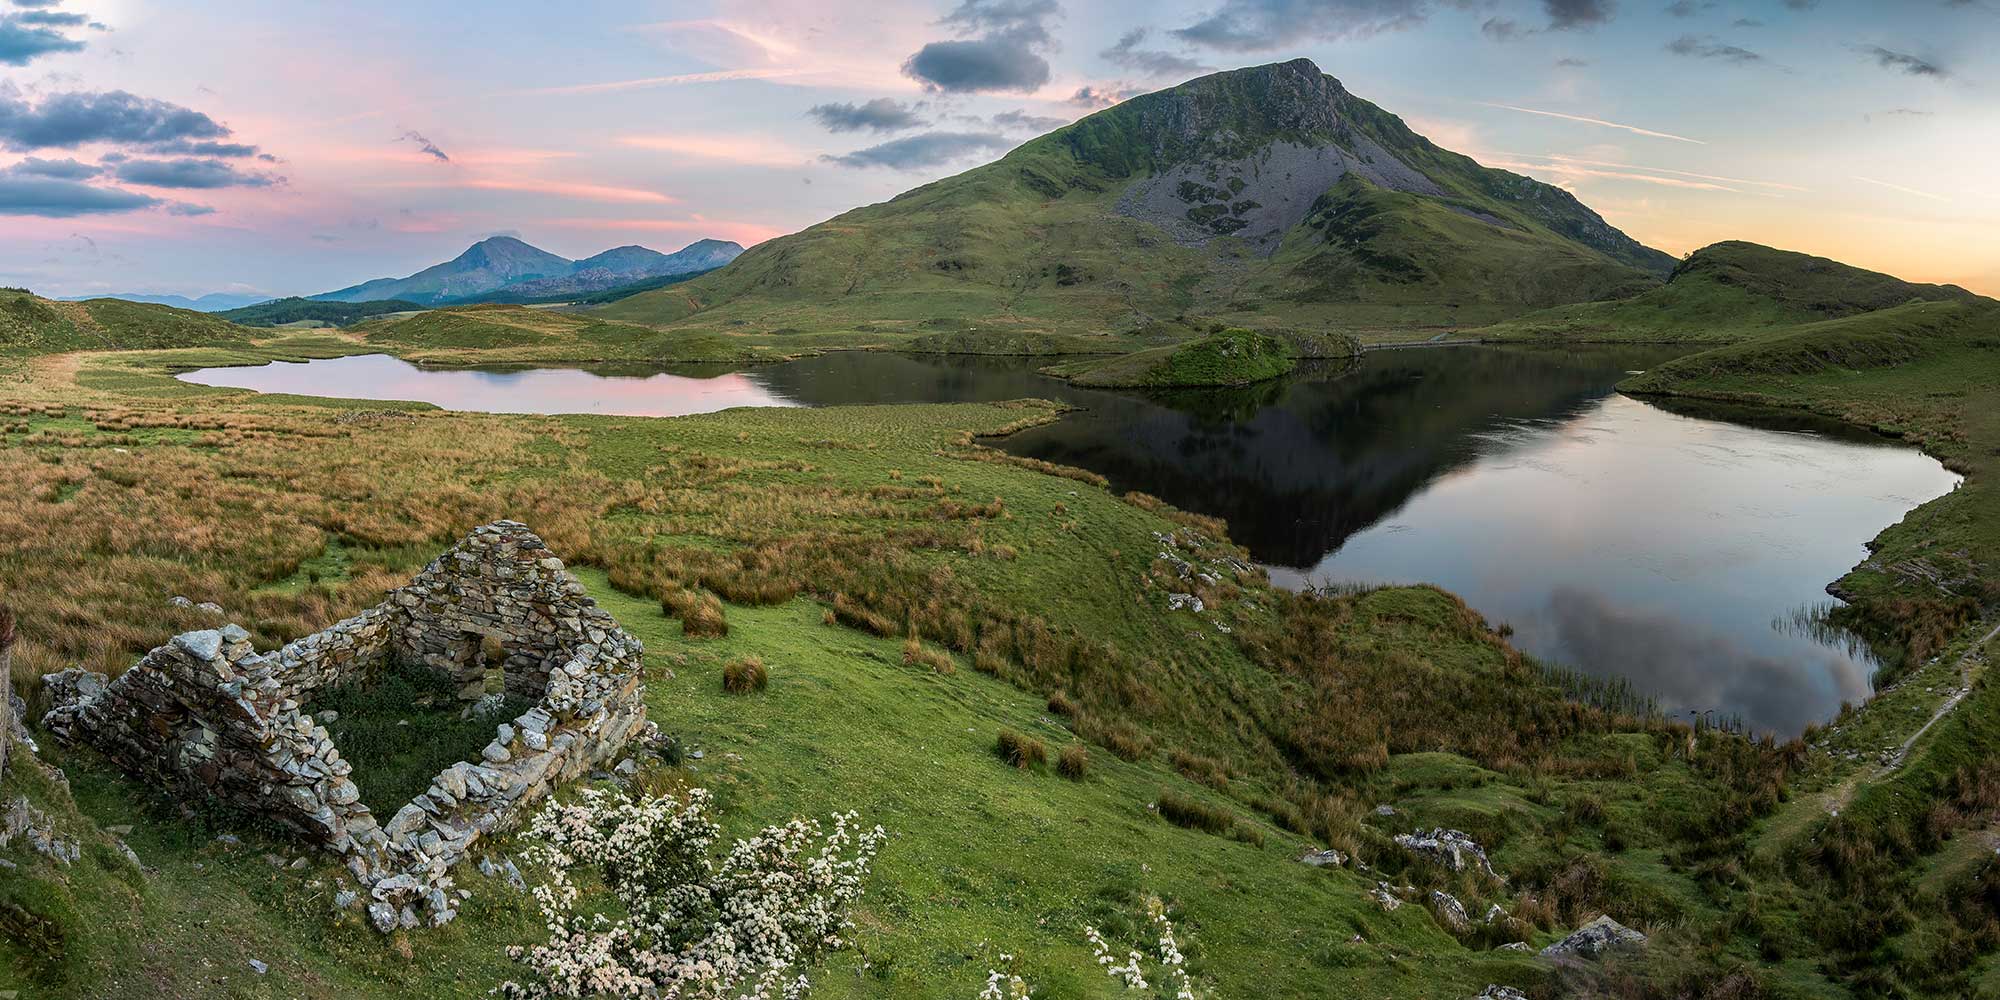 Snowdonia, North Wales and Chester Small-Group Day Tour from Manchester